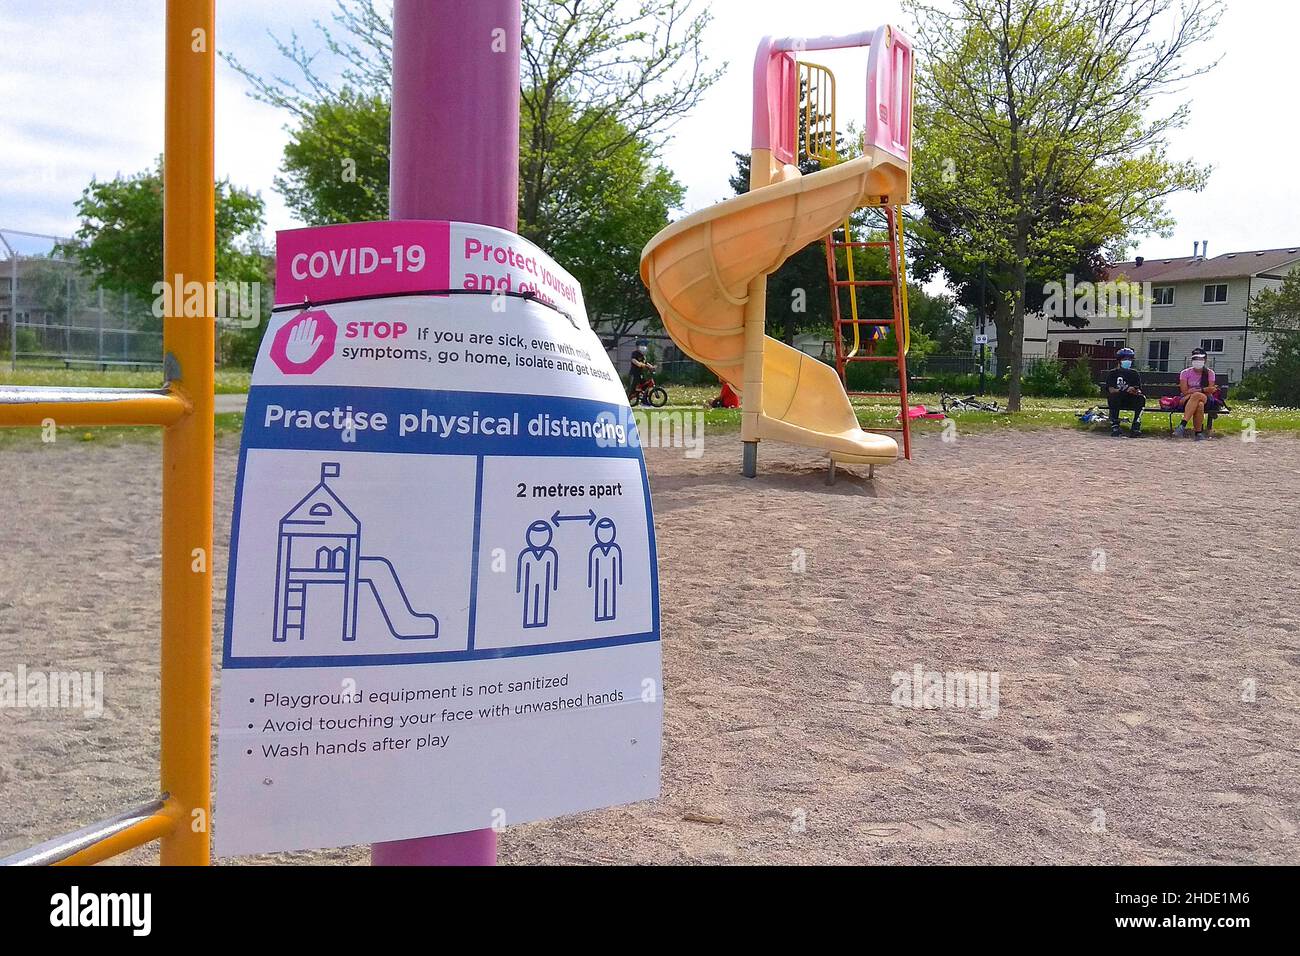 Toronto, Ontario, Canada - 19th May 2021: A poster of social distancing sign at the playground in Toronto, Canada. Stock Photo